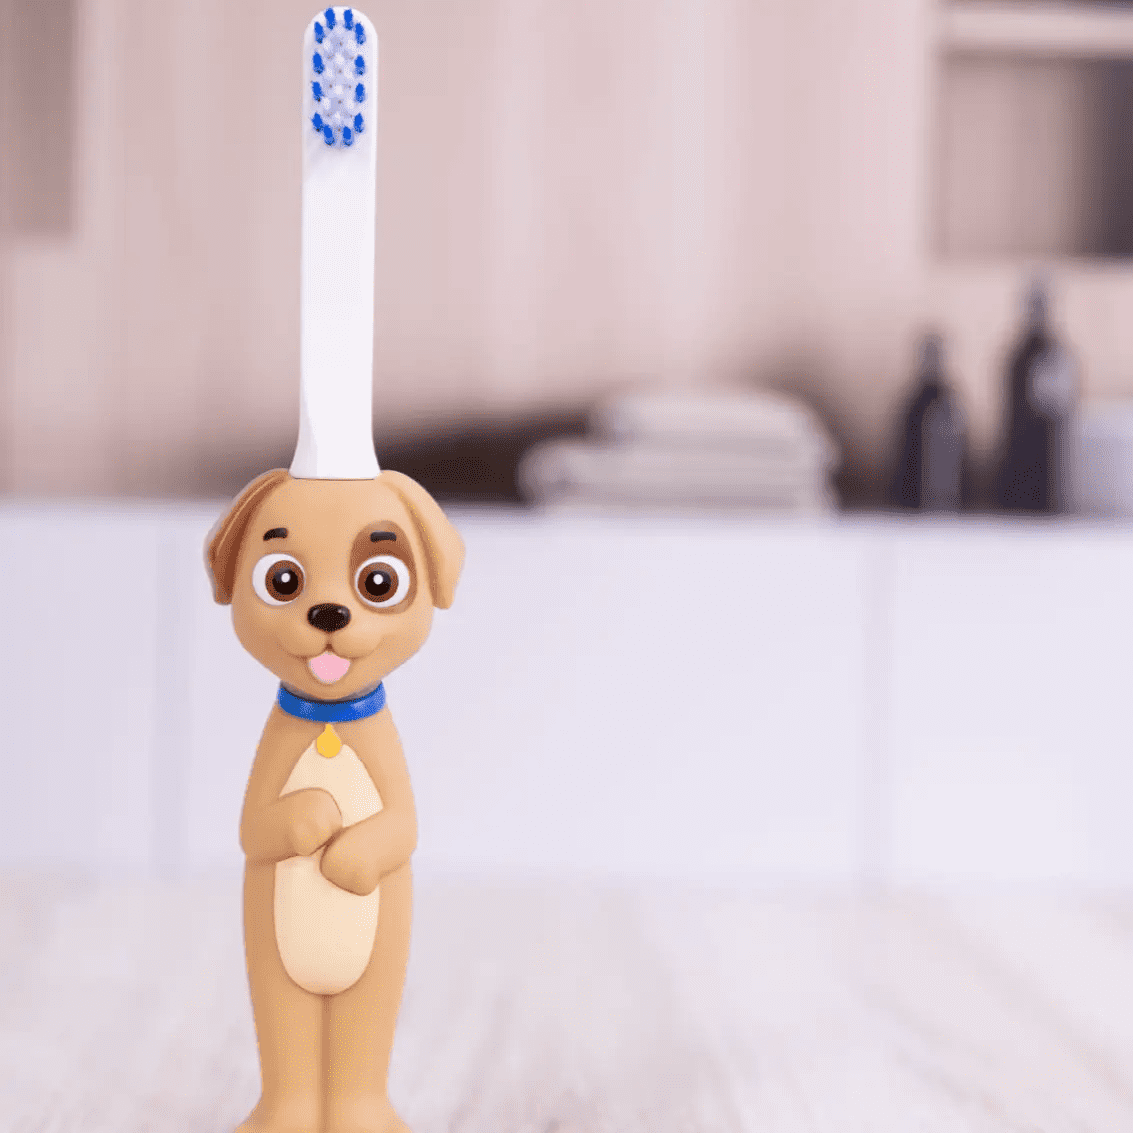 Petey the Puppy toy toothbrush